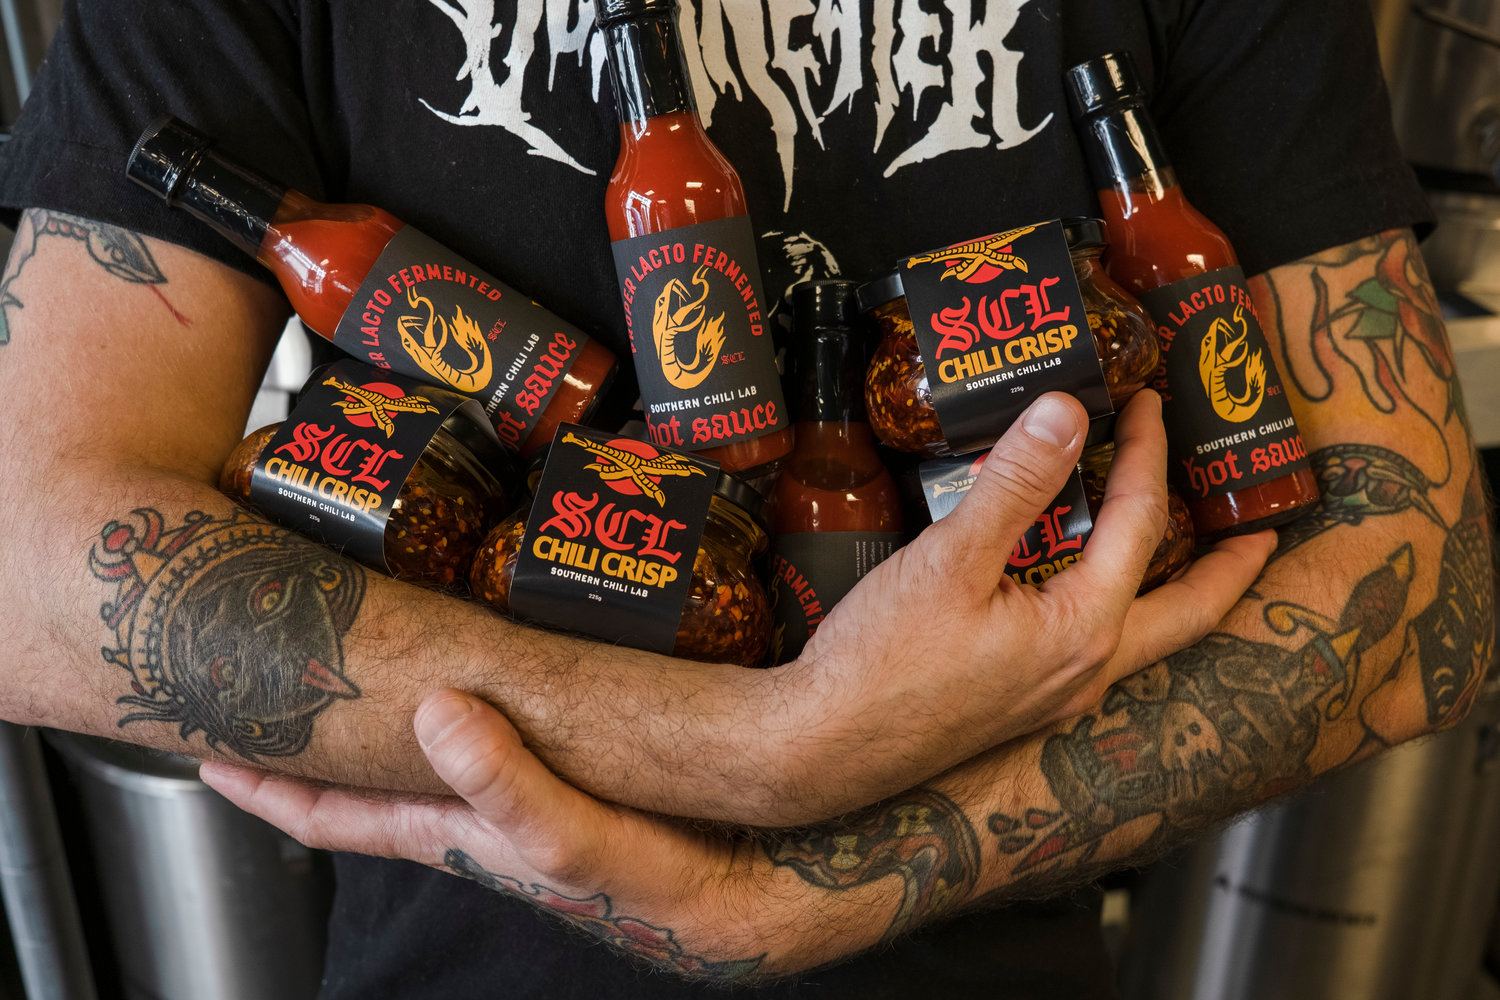 Southern Chili Lab currently has two products on the market: a fermented hot sauce and chili crisp. The products are available at pop ups locally and at The Pantry at The Wharf, with more retailers coming soon.